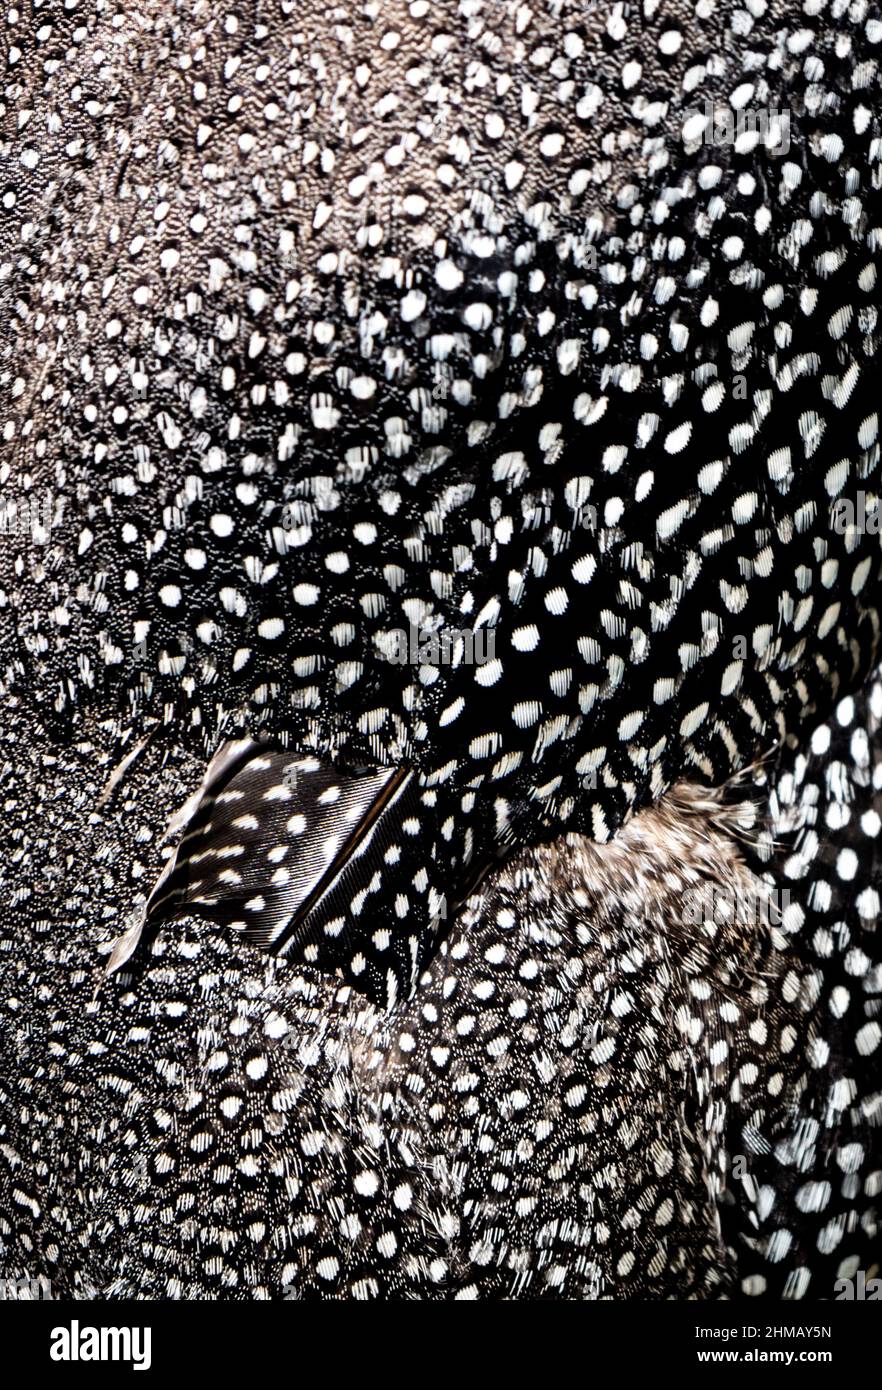 Incredible rounded shapes in black and white angola chicken feathers. Repetitive patterns formed by animal nature. Stock Photo